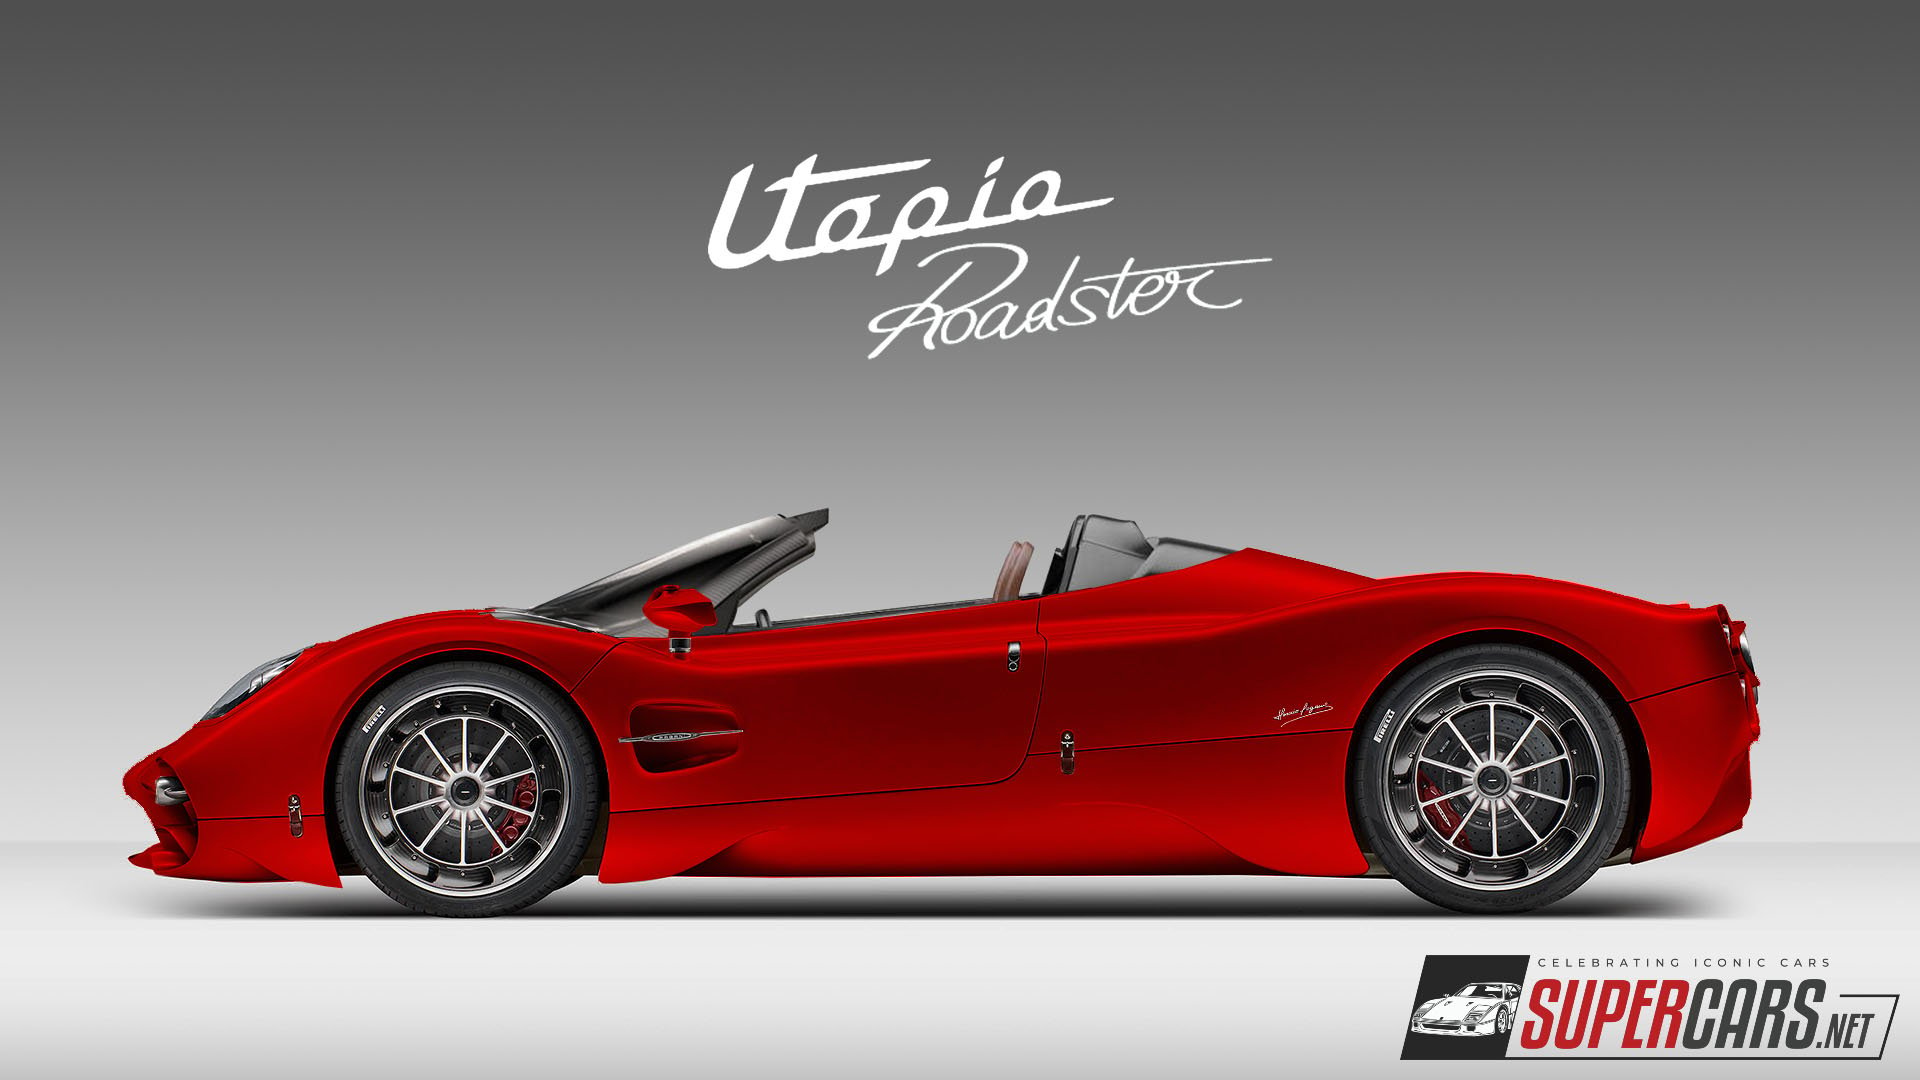 Will we get a Pagani Utopia Roadster?